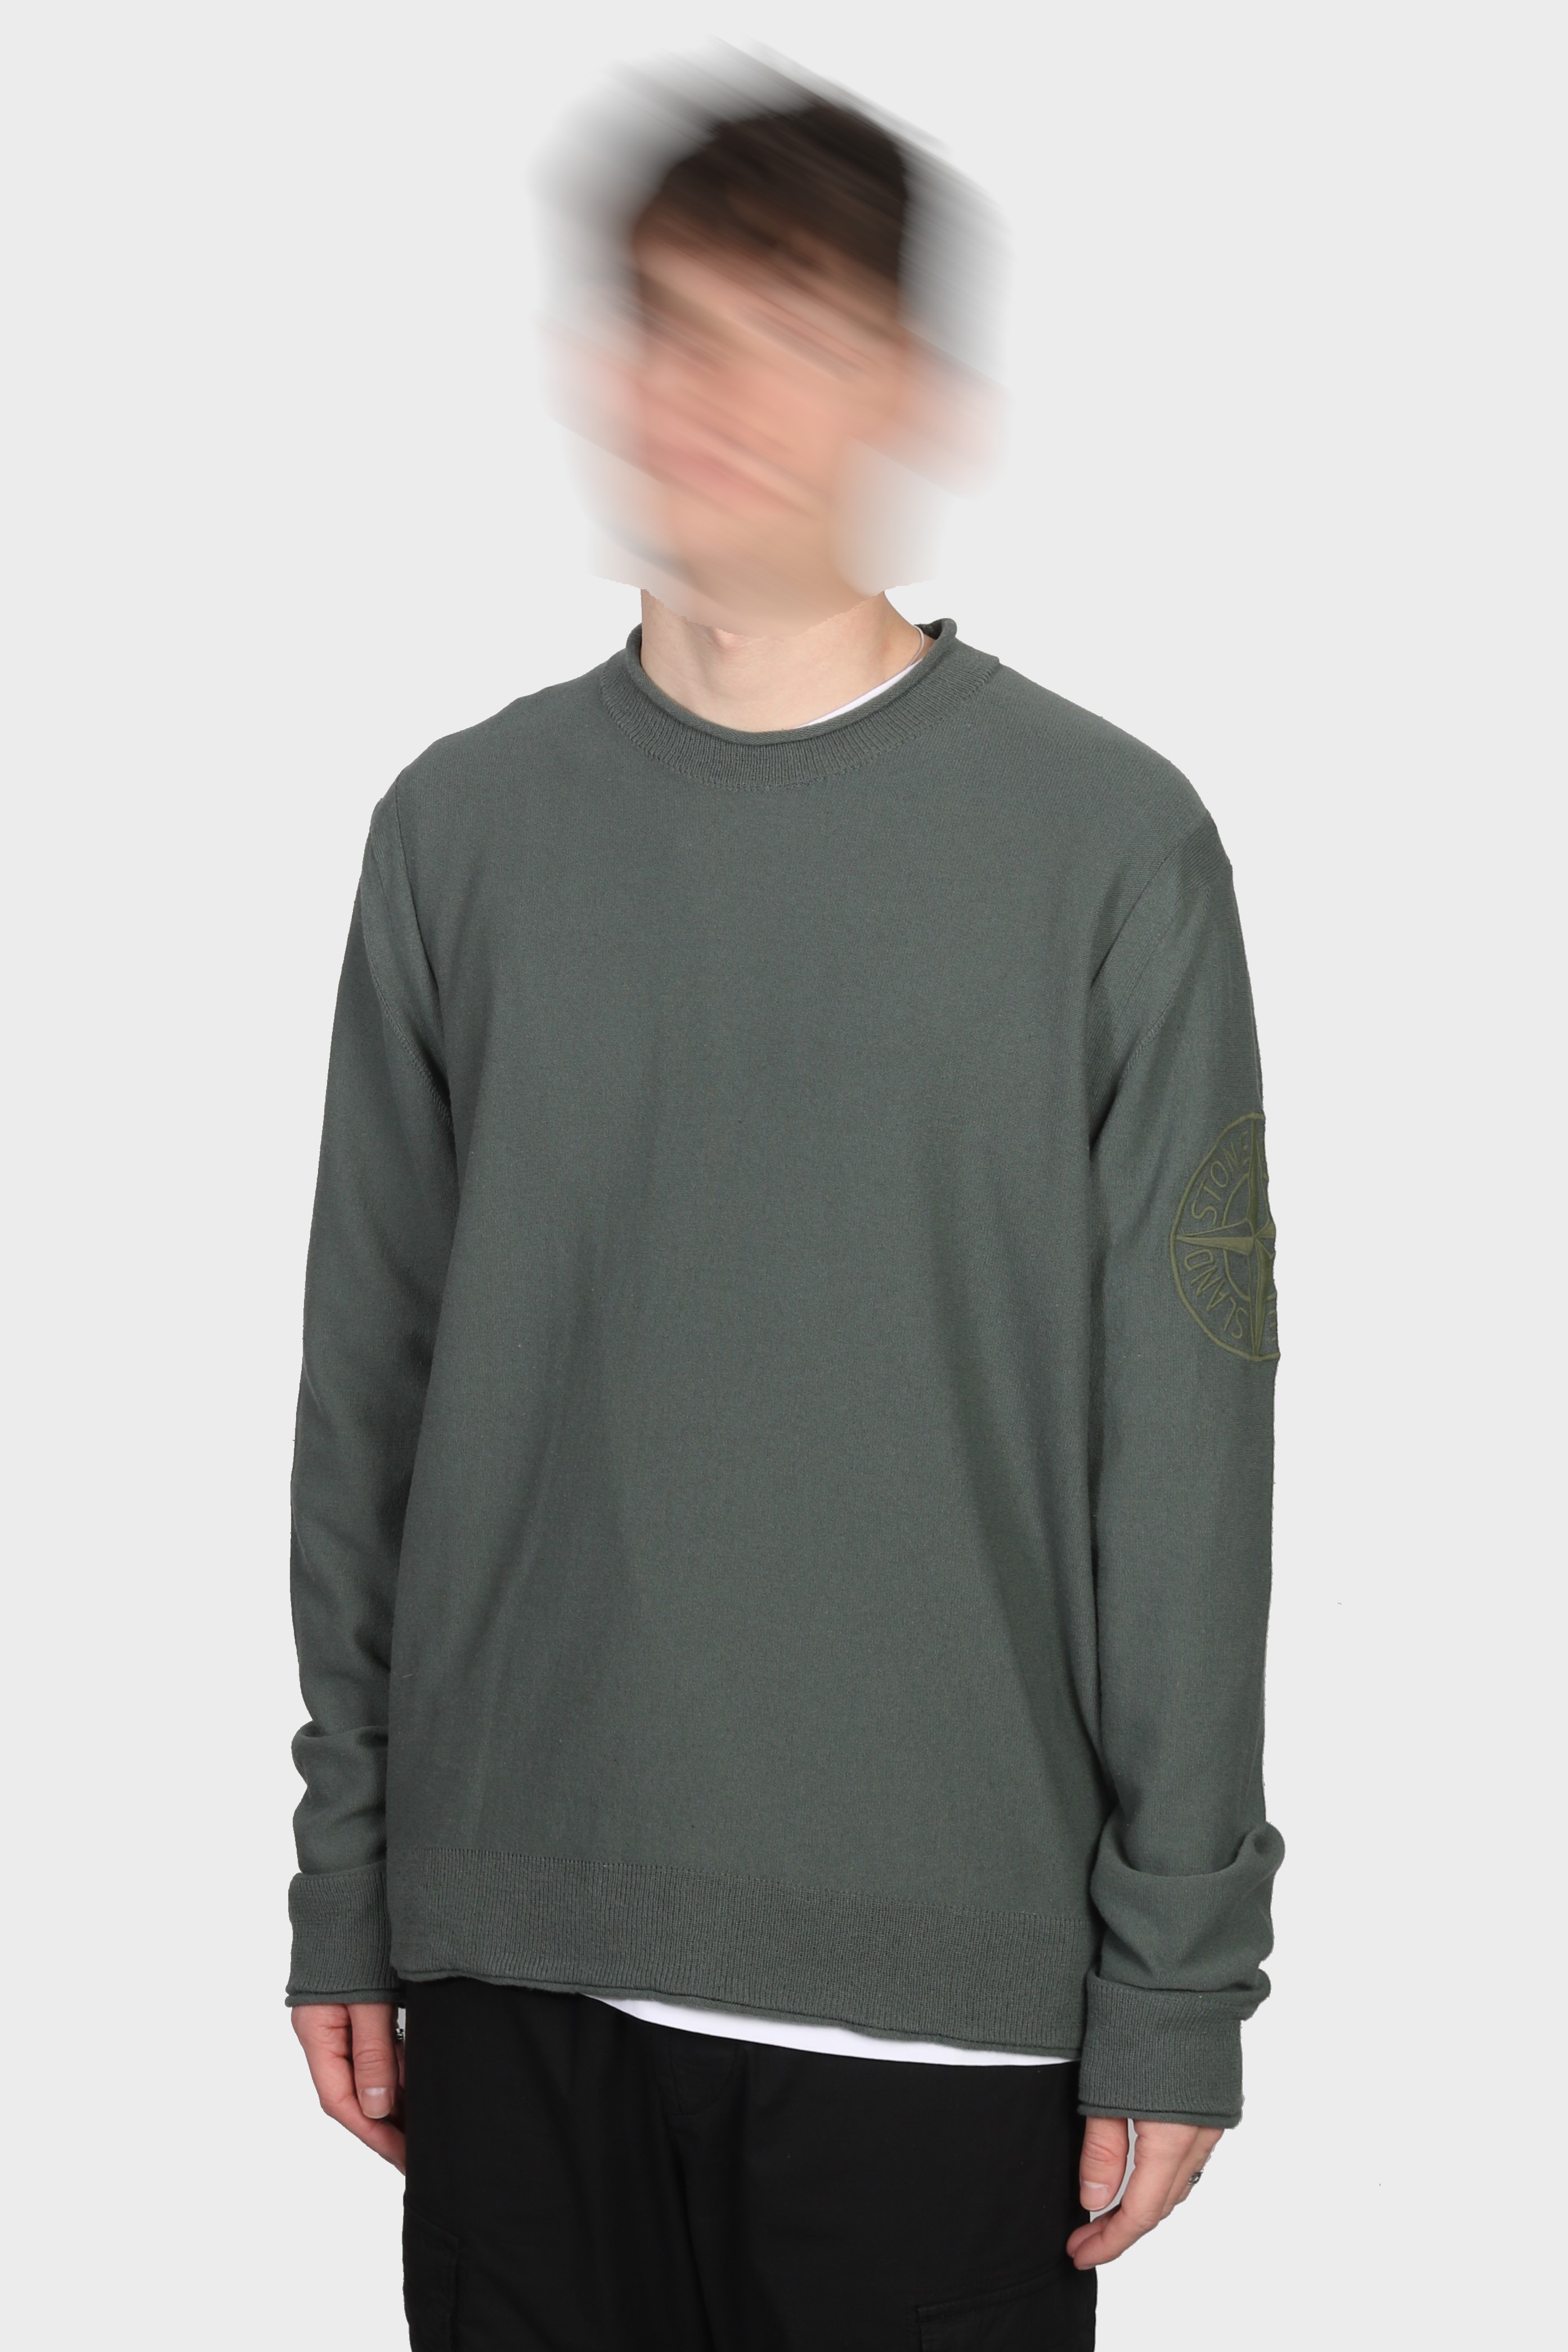 STONE ISLAND Cotton Knit Pullover in Green